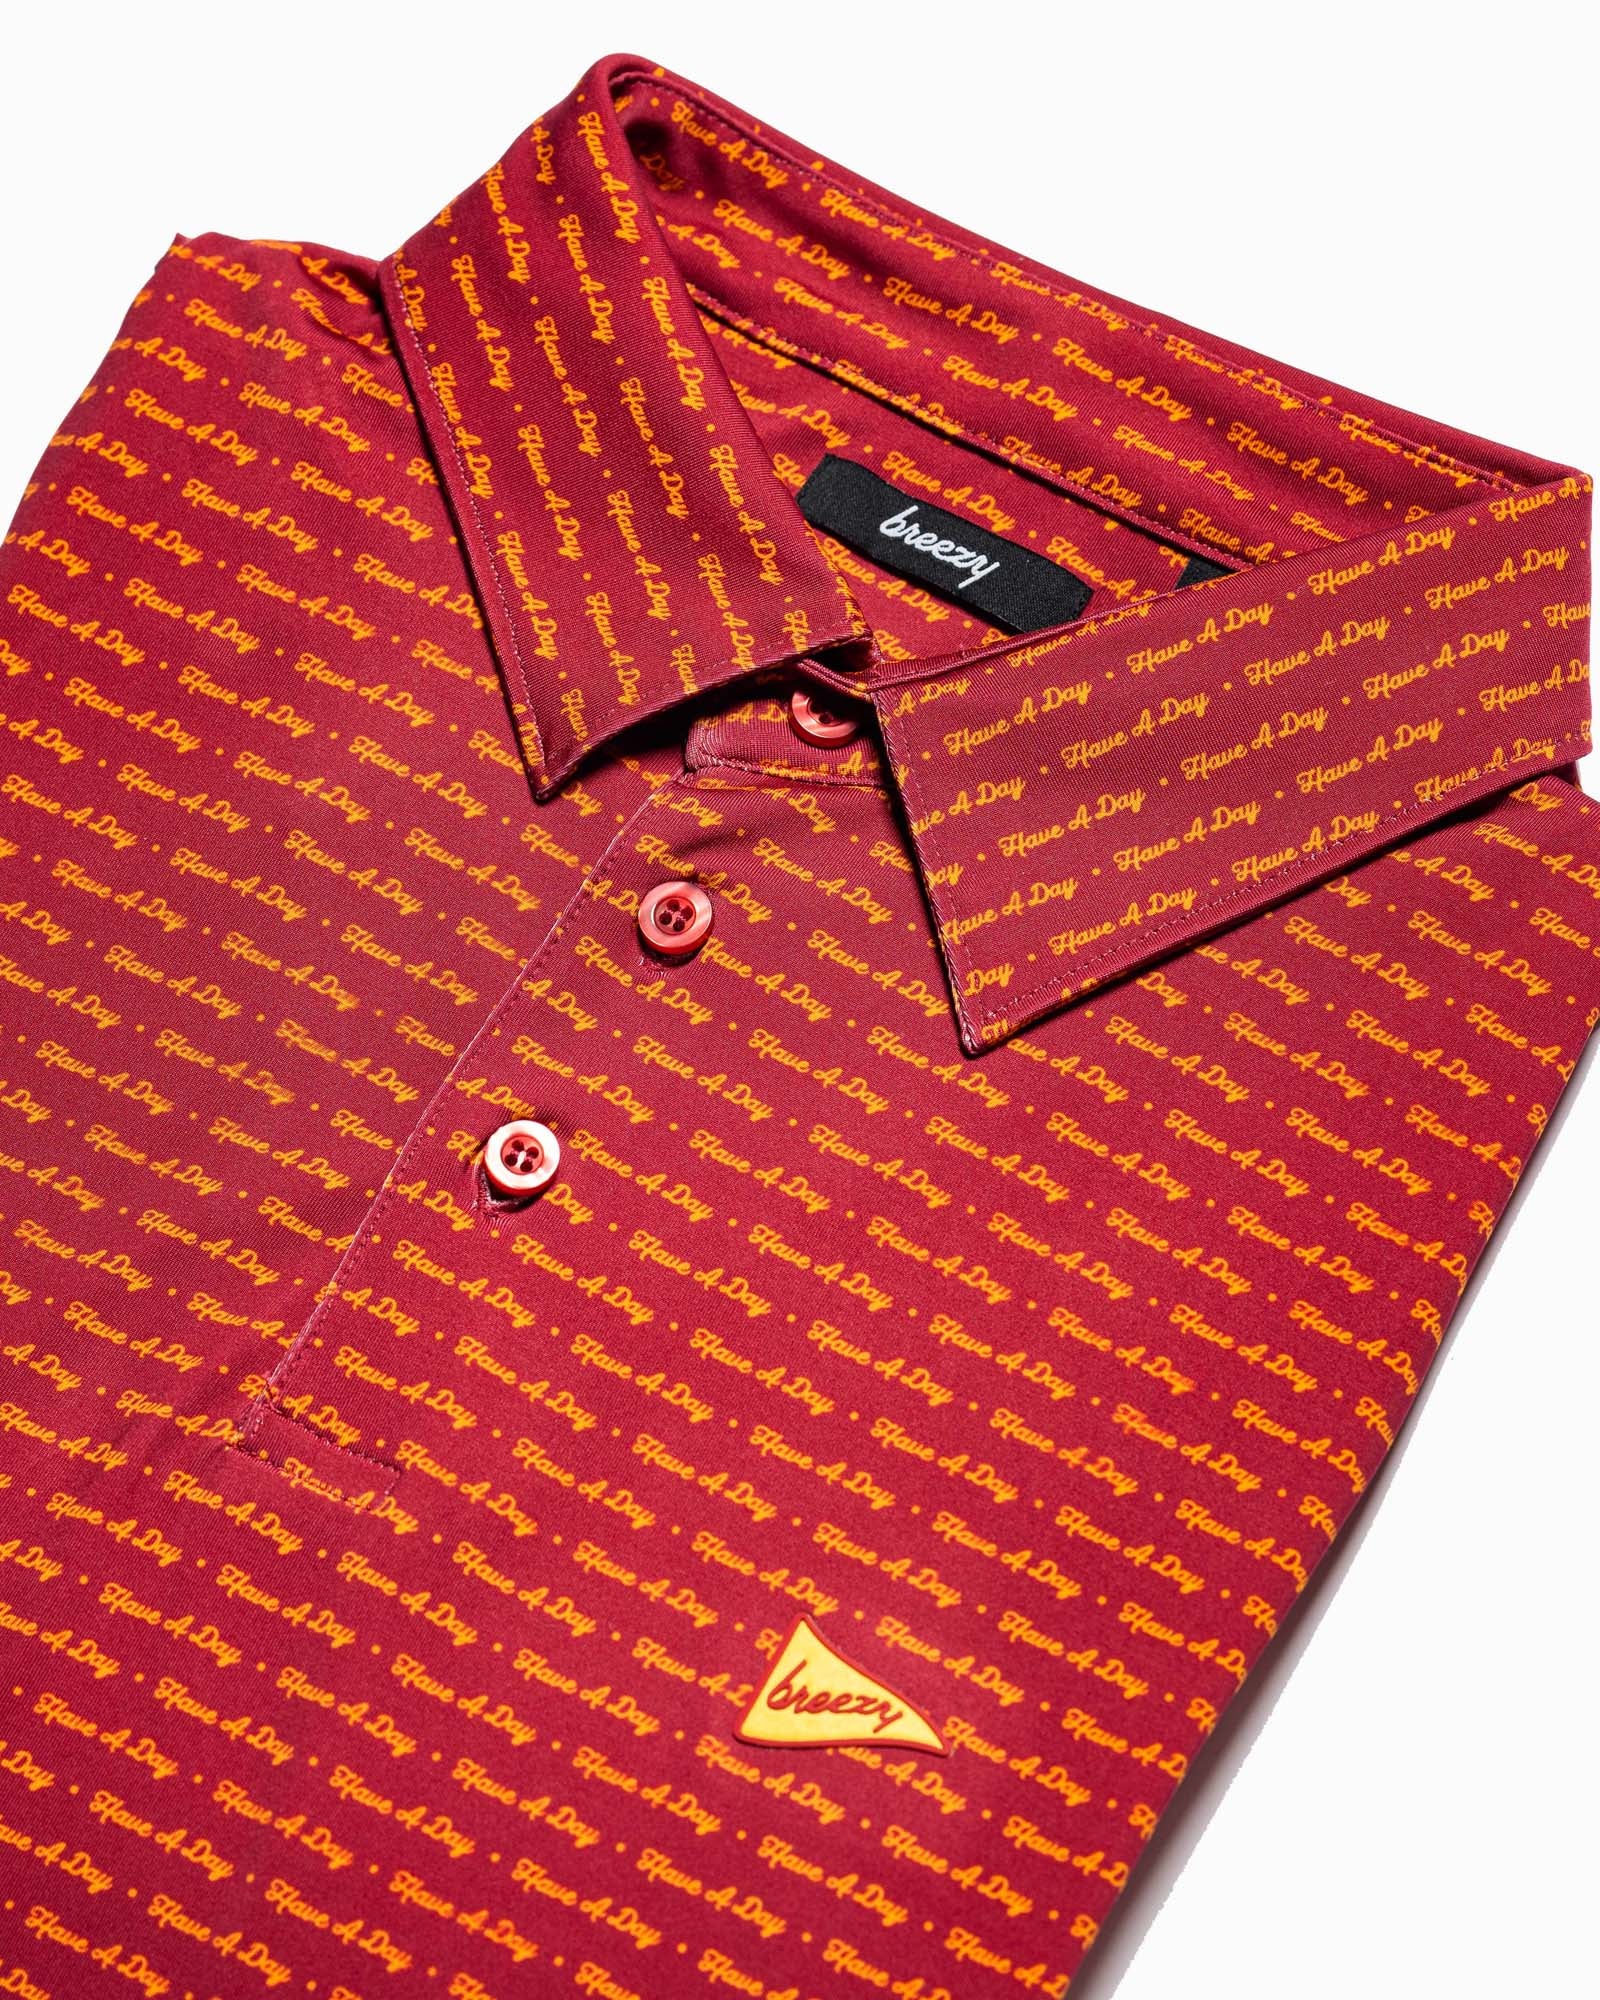 Breezy Have A Day Cardinal & Gold Polo 2XL